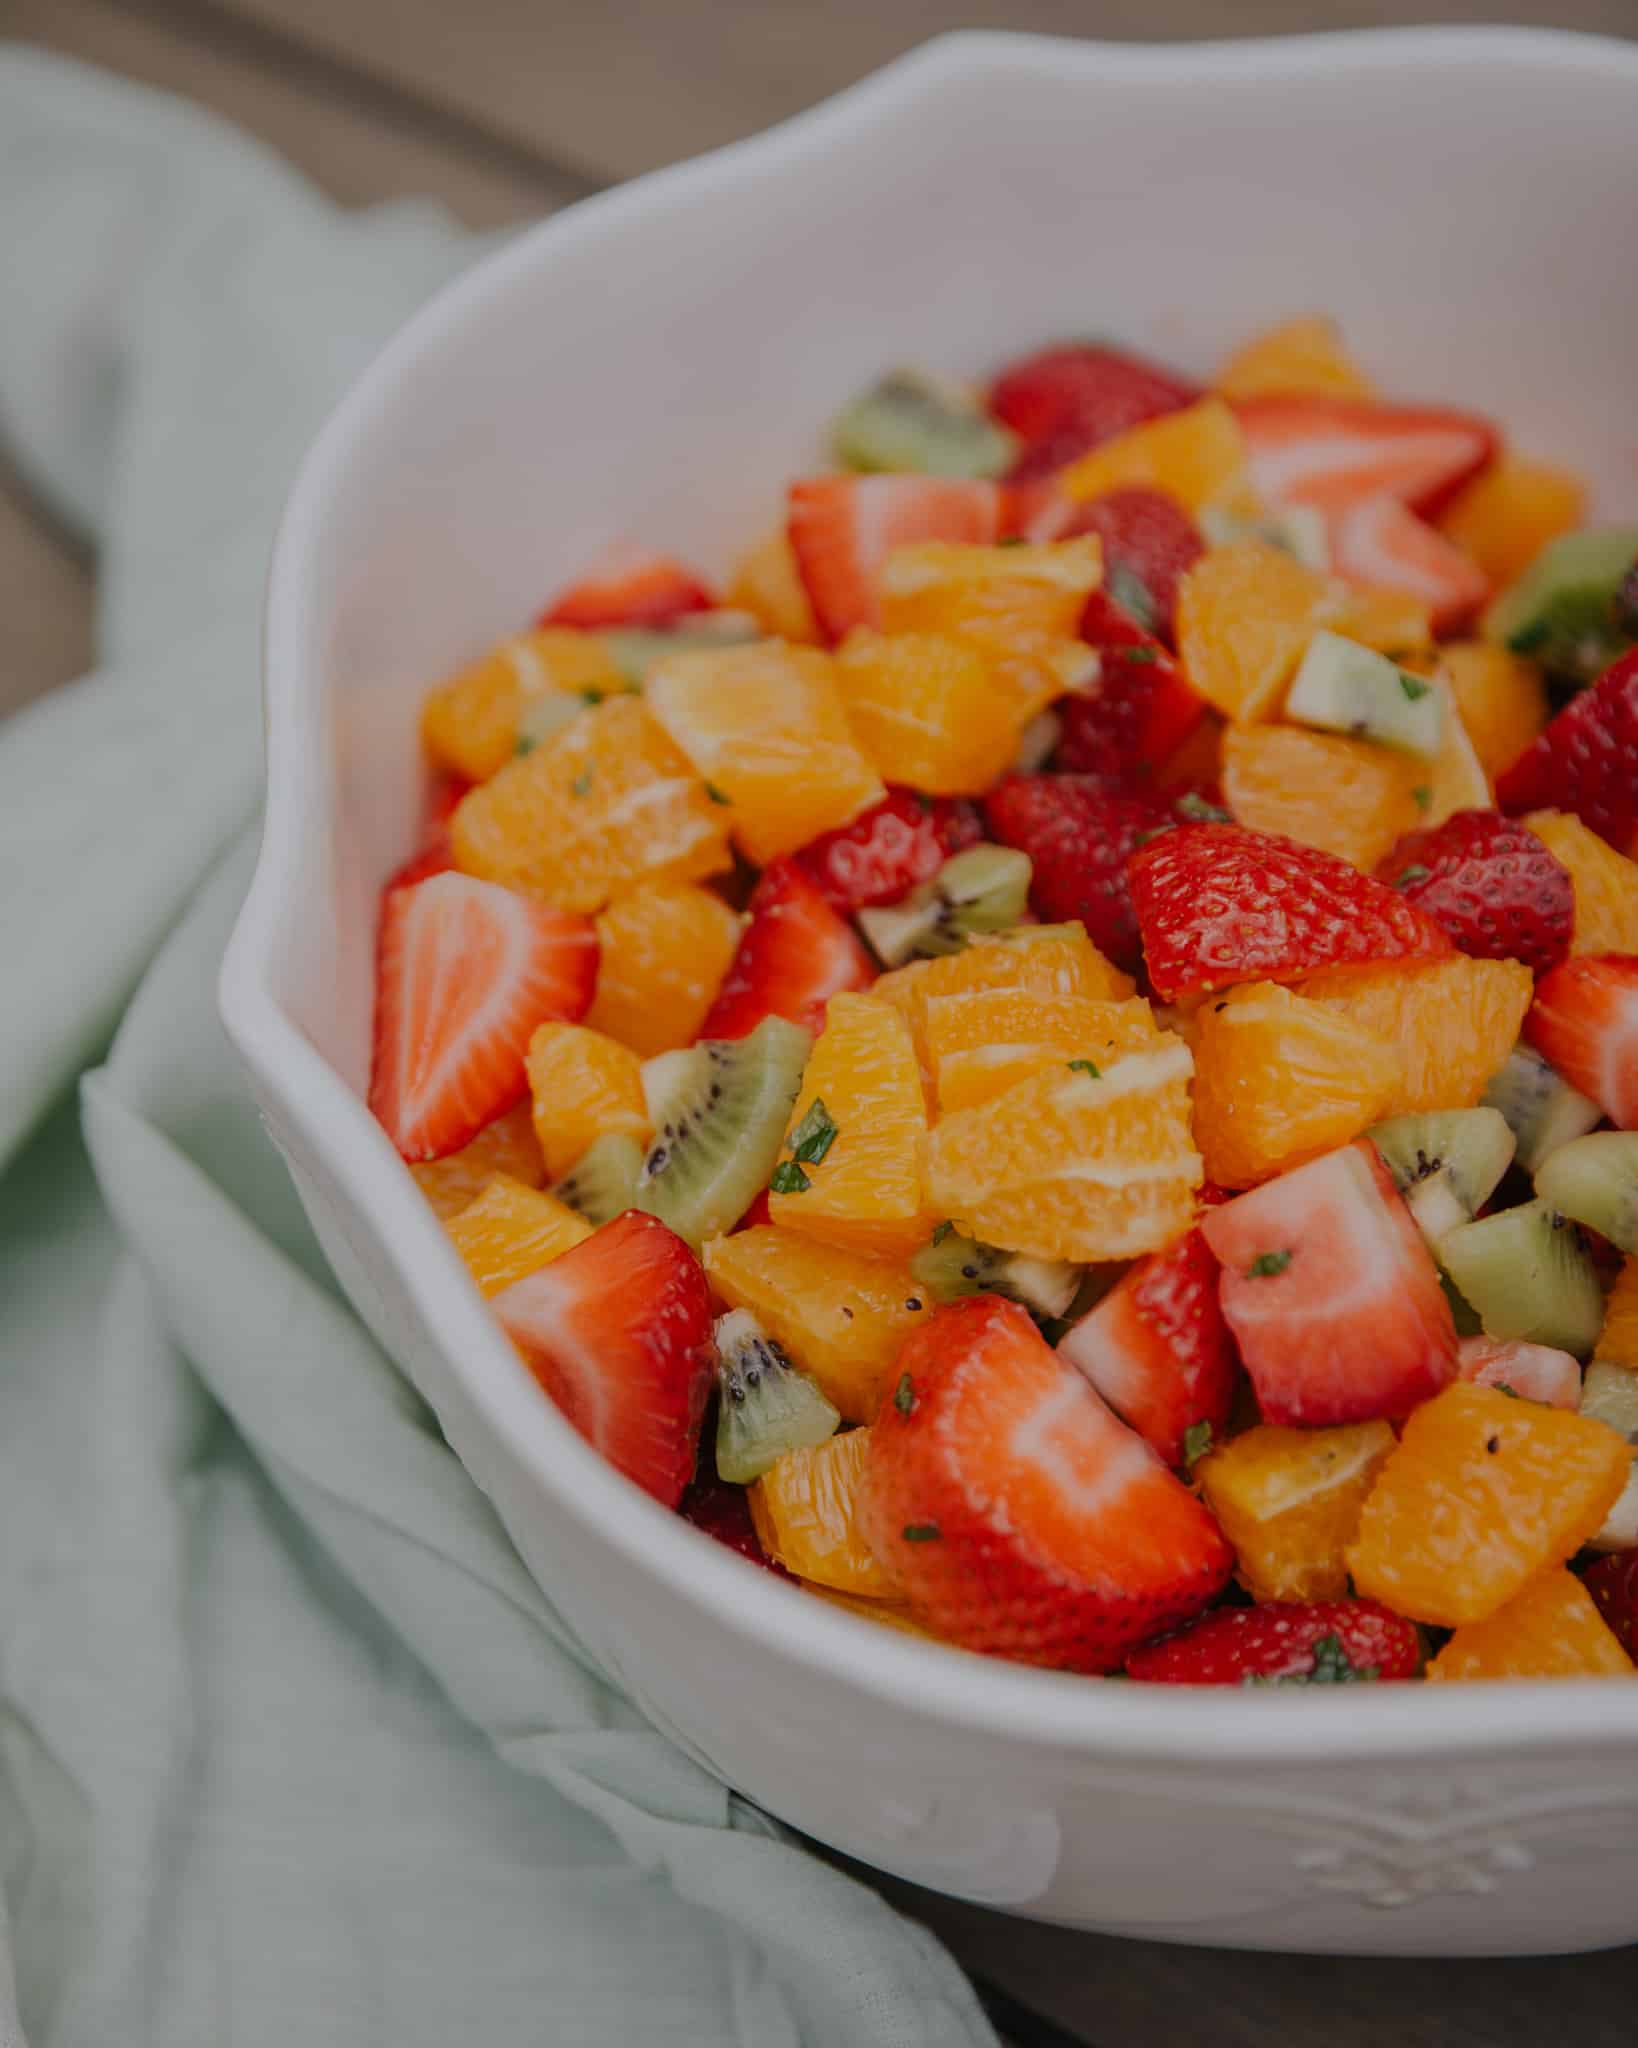 My Top Requested Fruit Salad  |  Chris Loves Julia